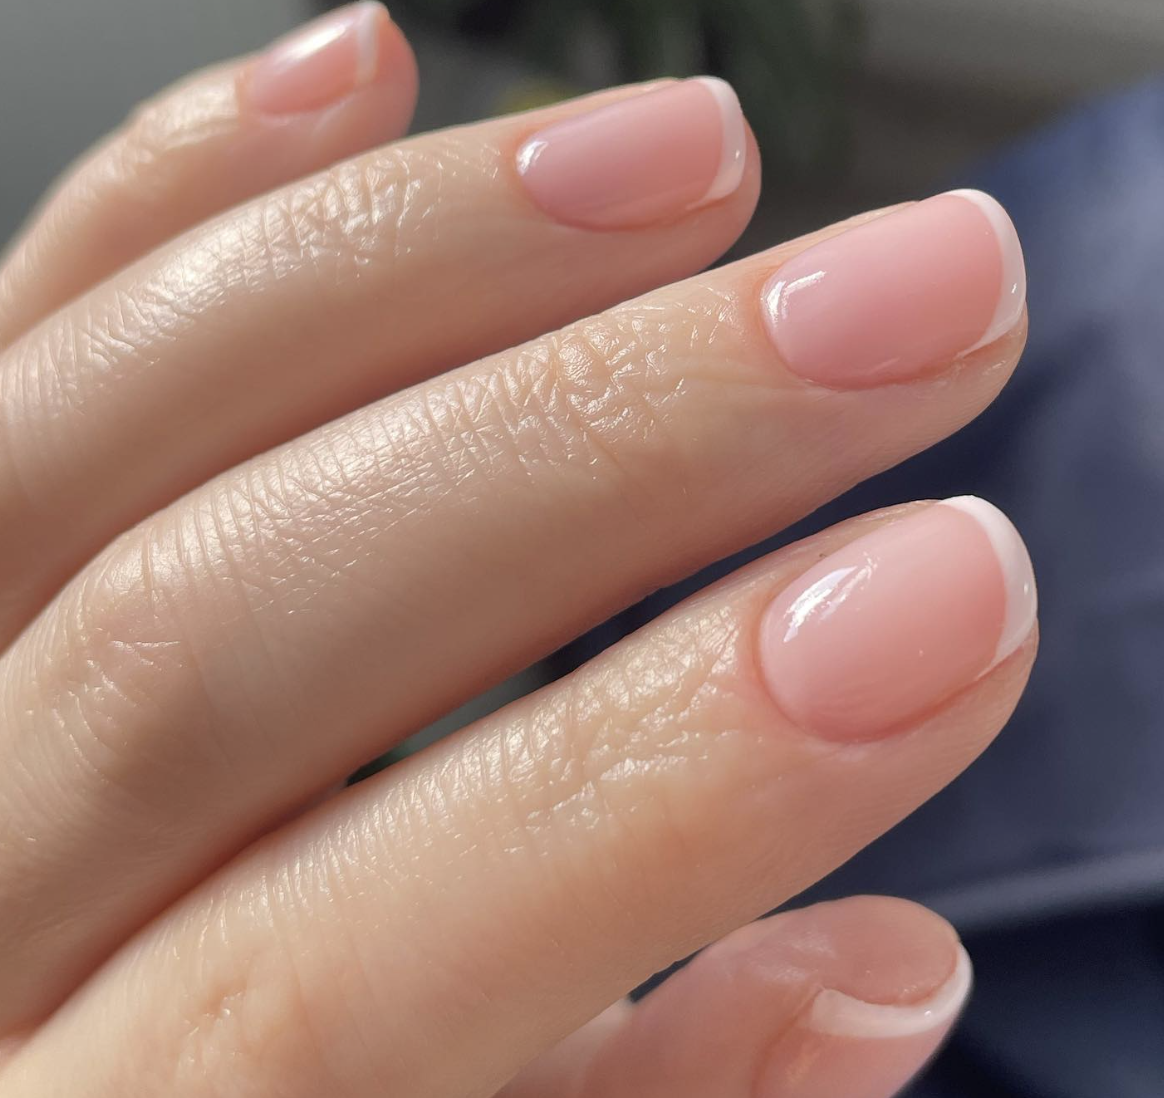 Image of nails featuring a french manicure